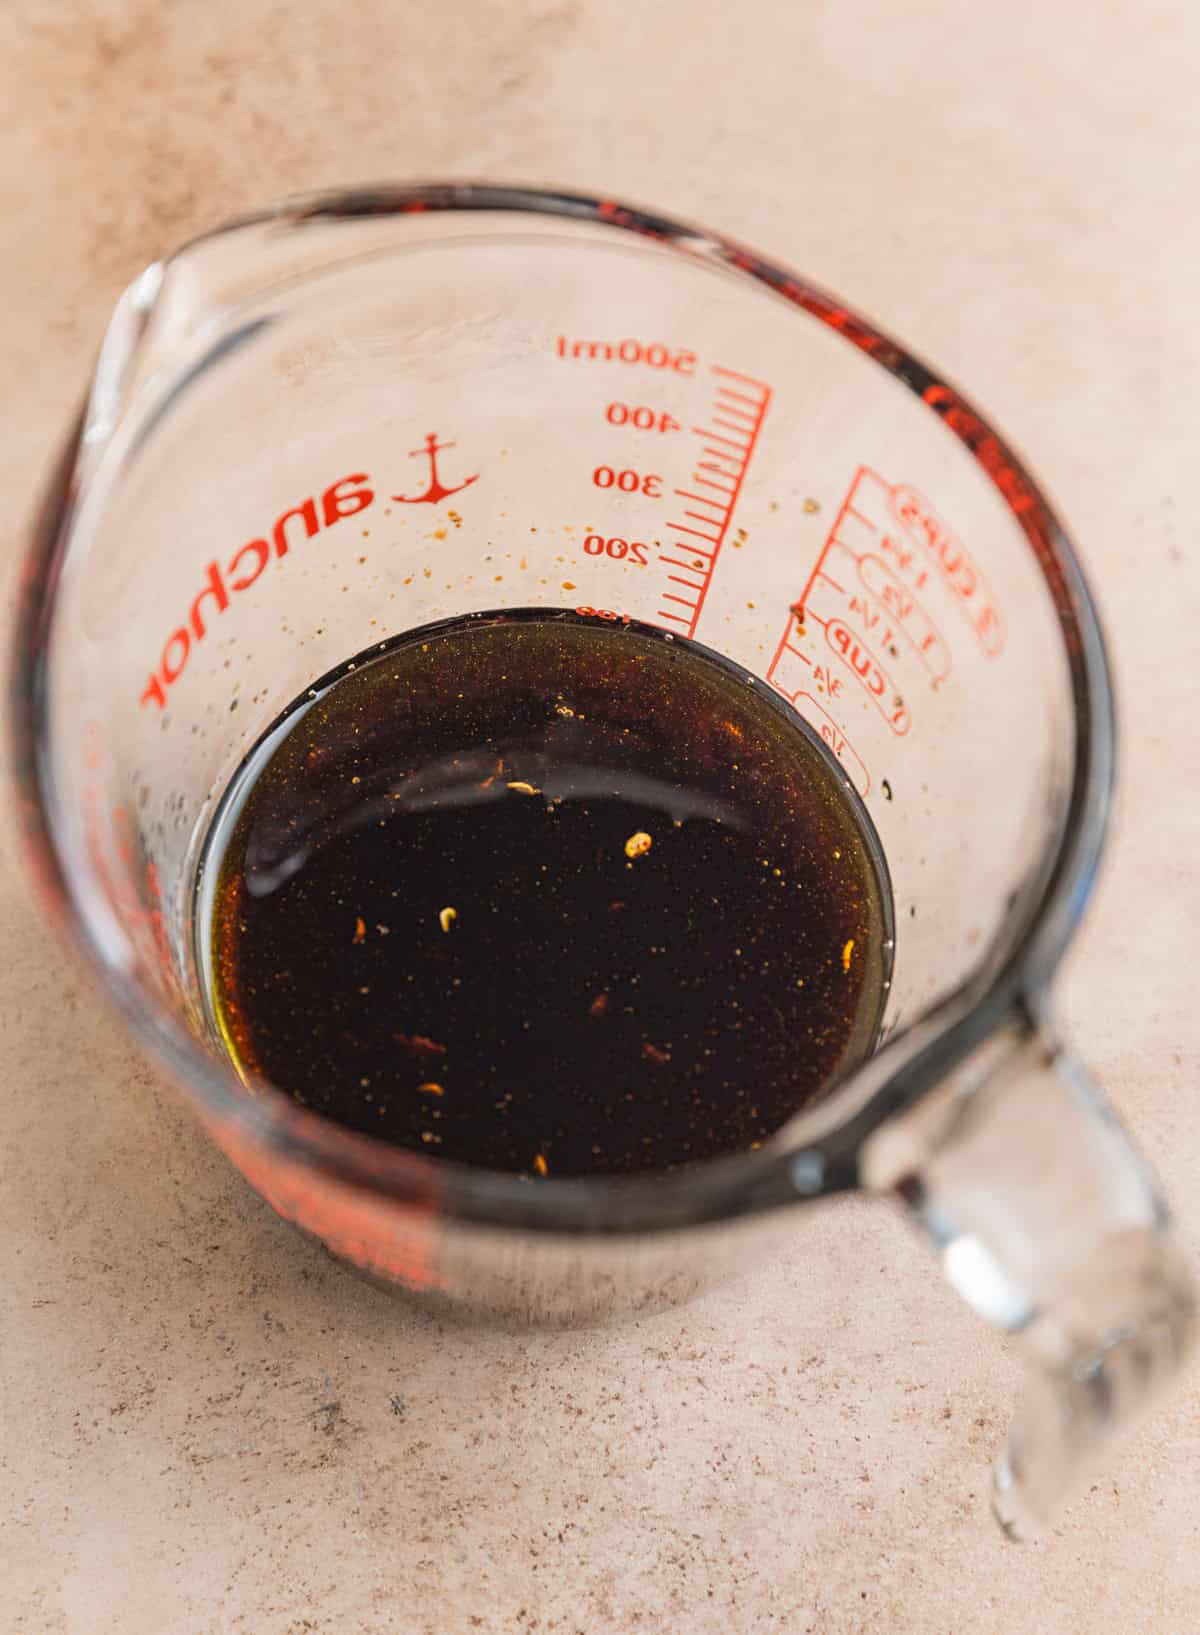 Olive oil, balsamic vinegar, garlic, salt and pepper mixed in measuring cup.